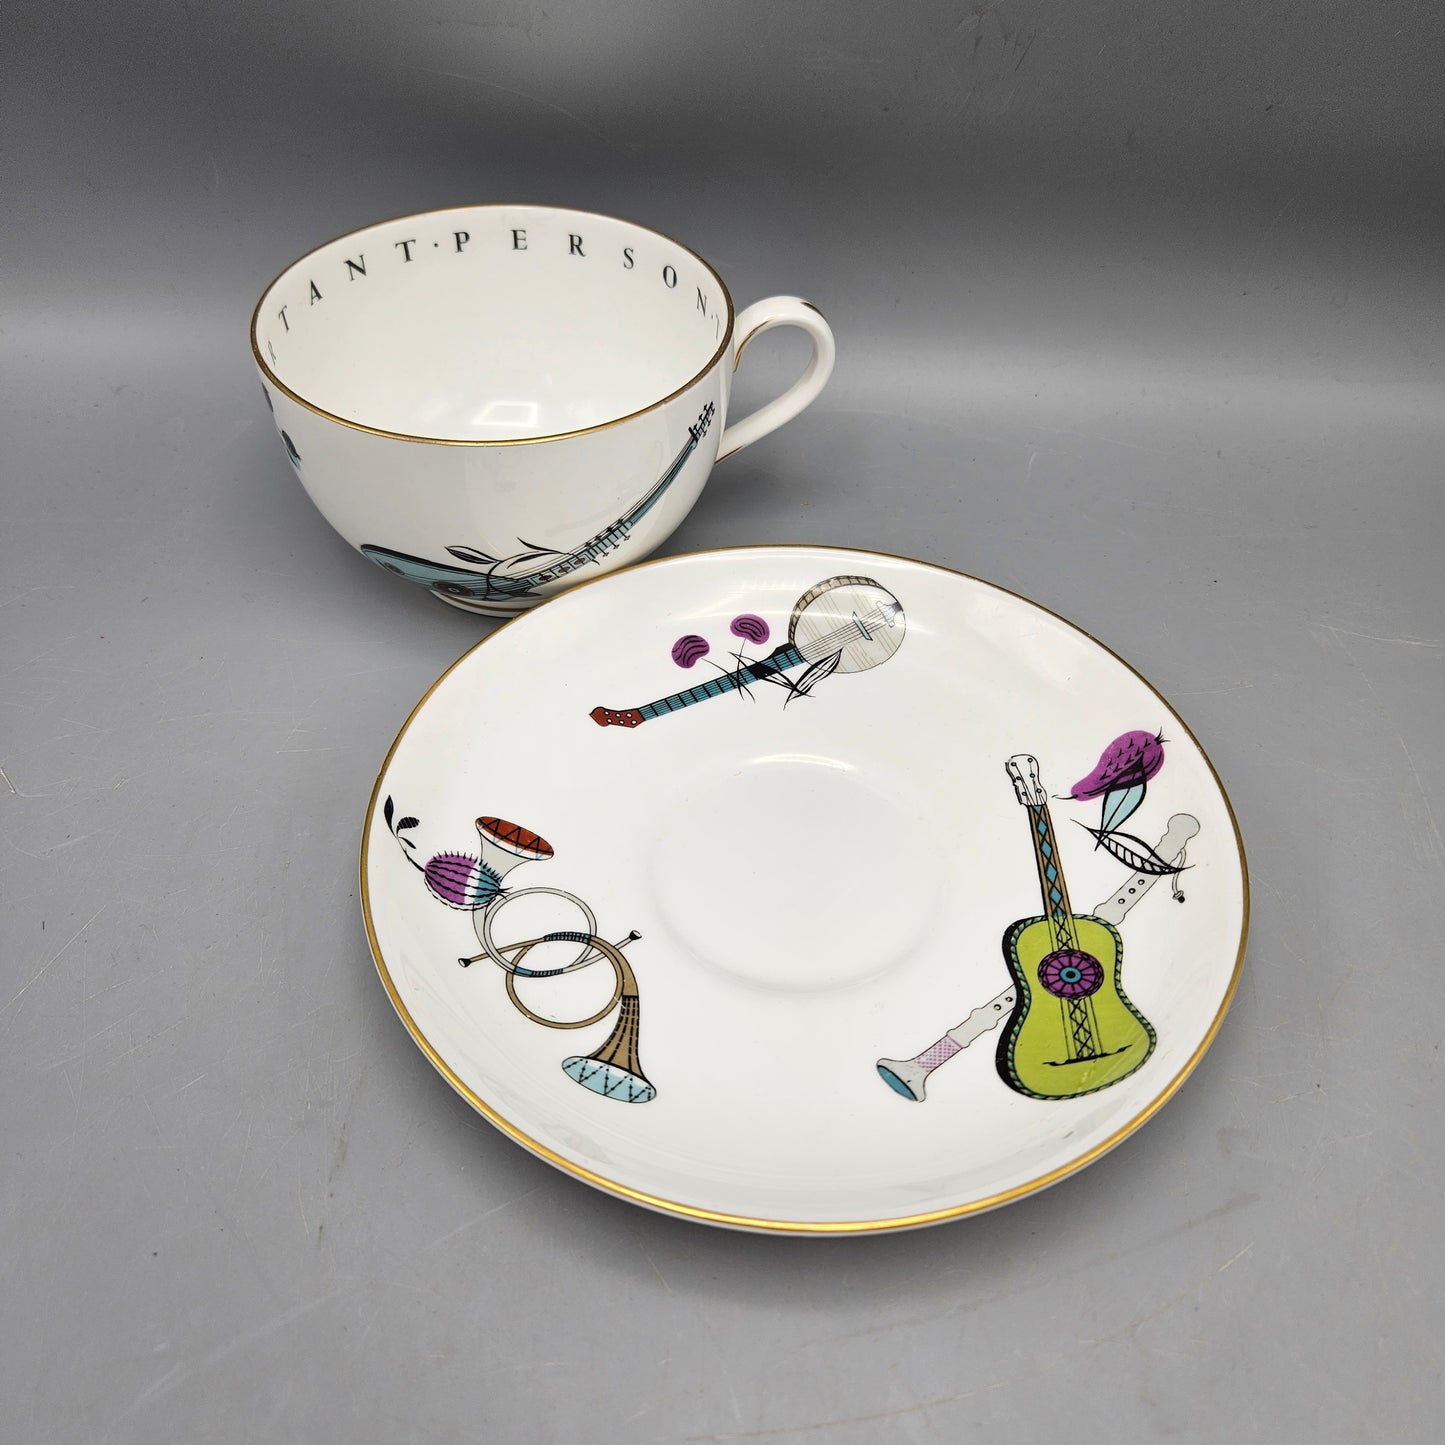 Royal Worcester Porcelain Fiesta Cup and Saucer